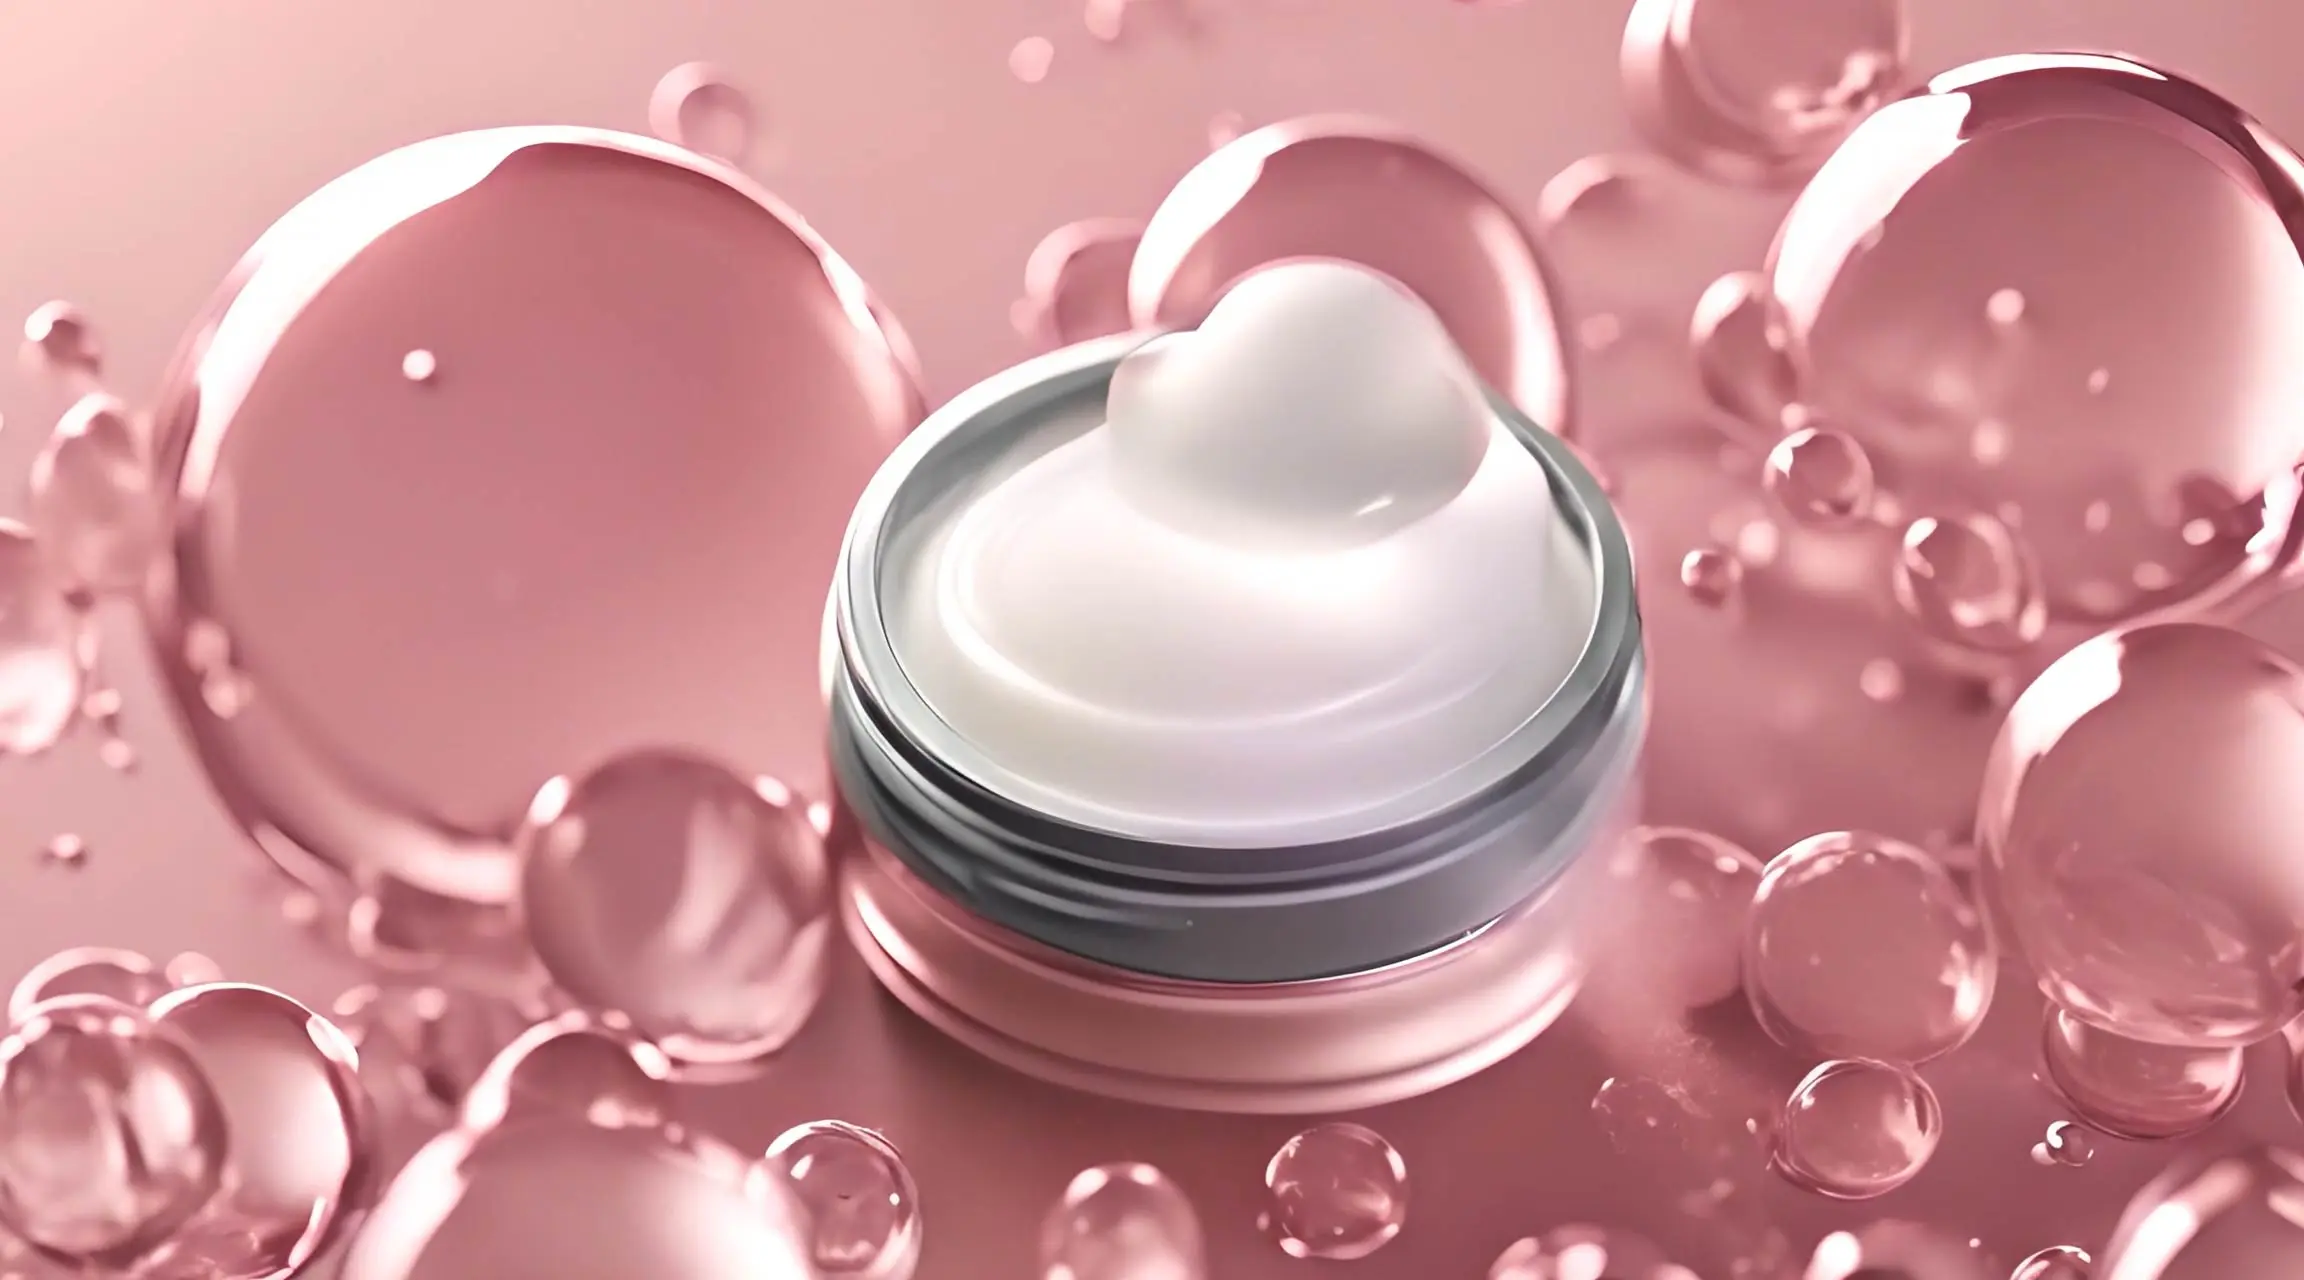 Luxurious Skincare Cream with Bubbles Stock Video